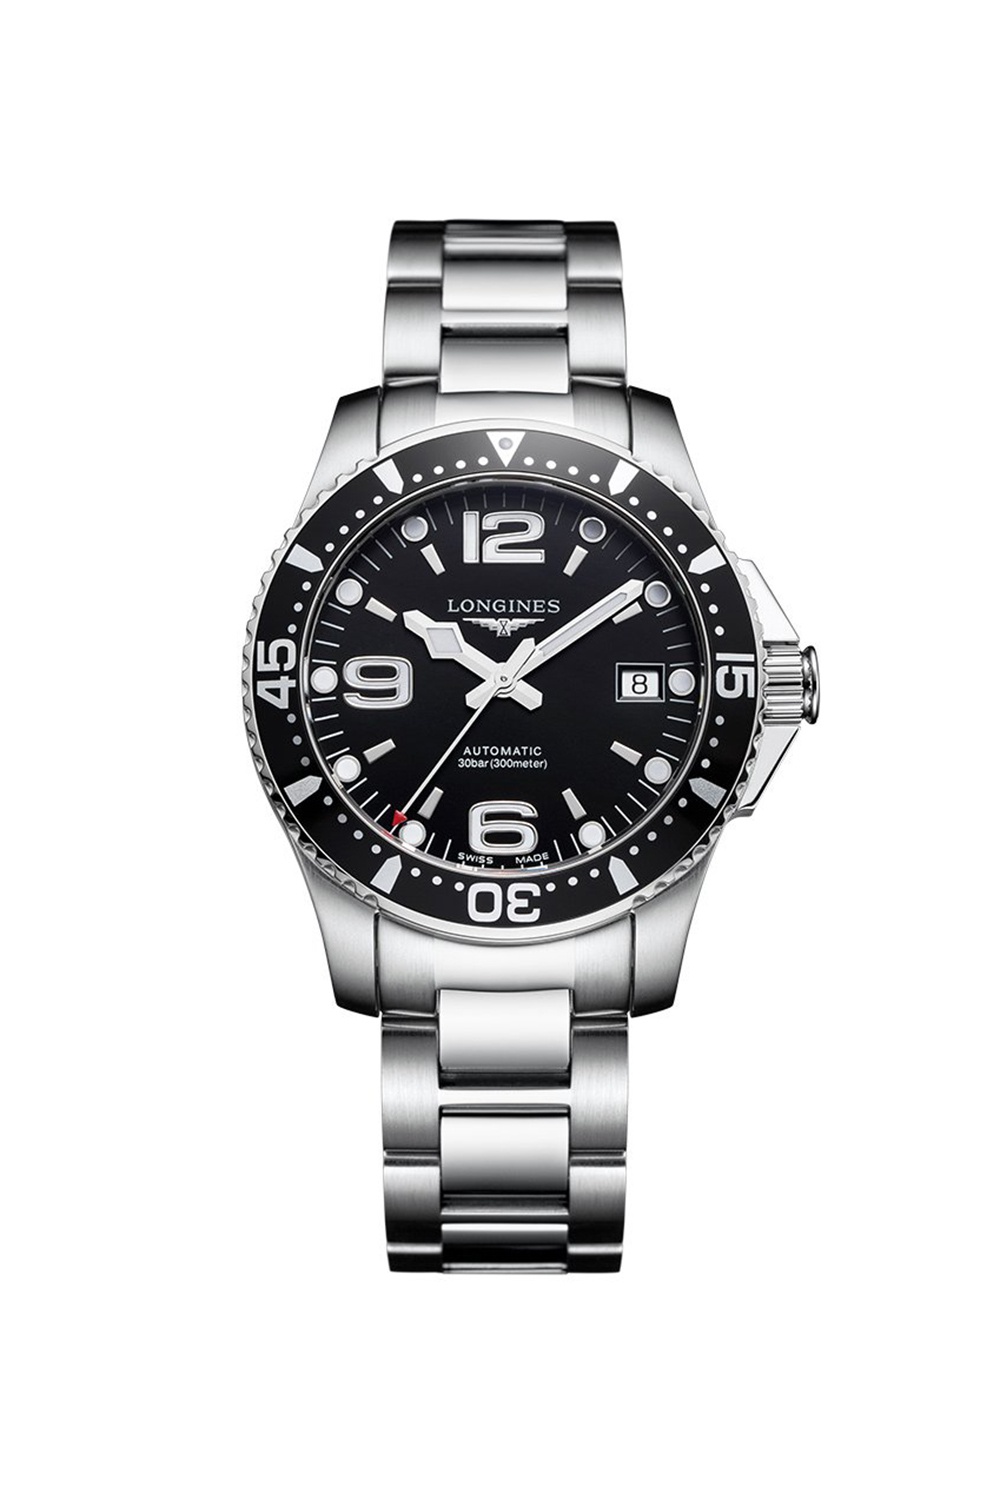 Longines Hydroconquest Stainless Steel Watch -L37424566 | Odel.lk